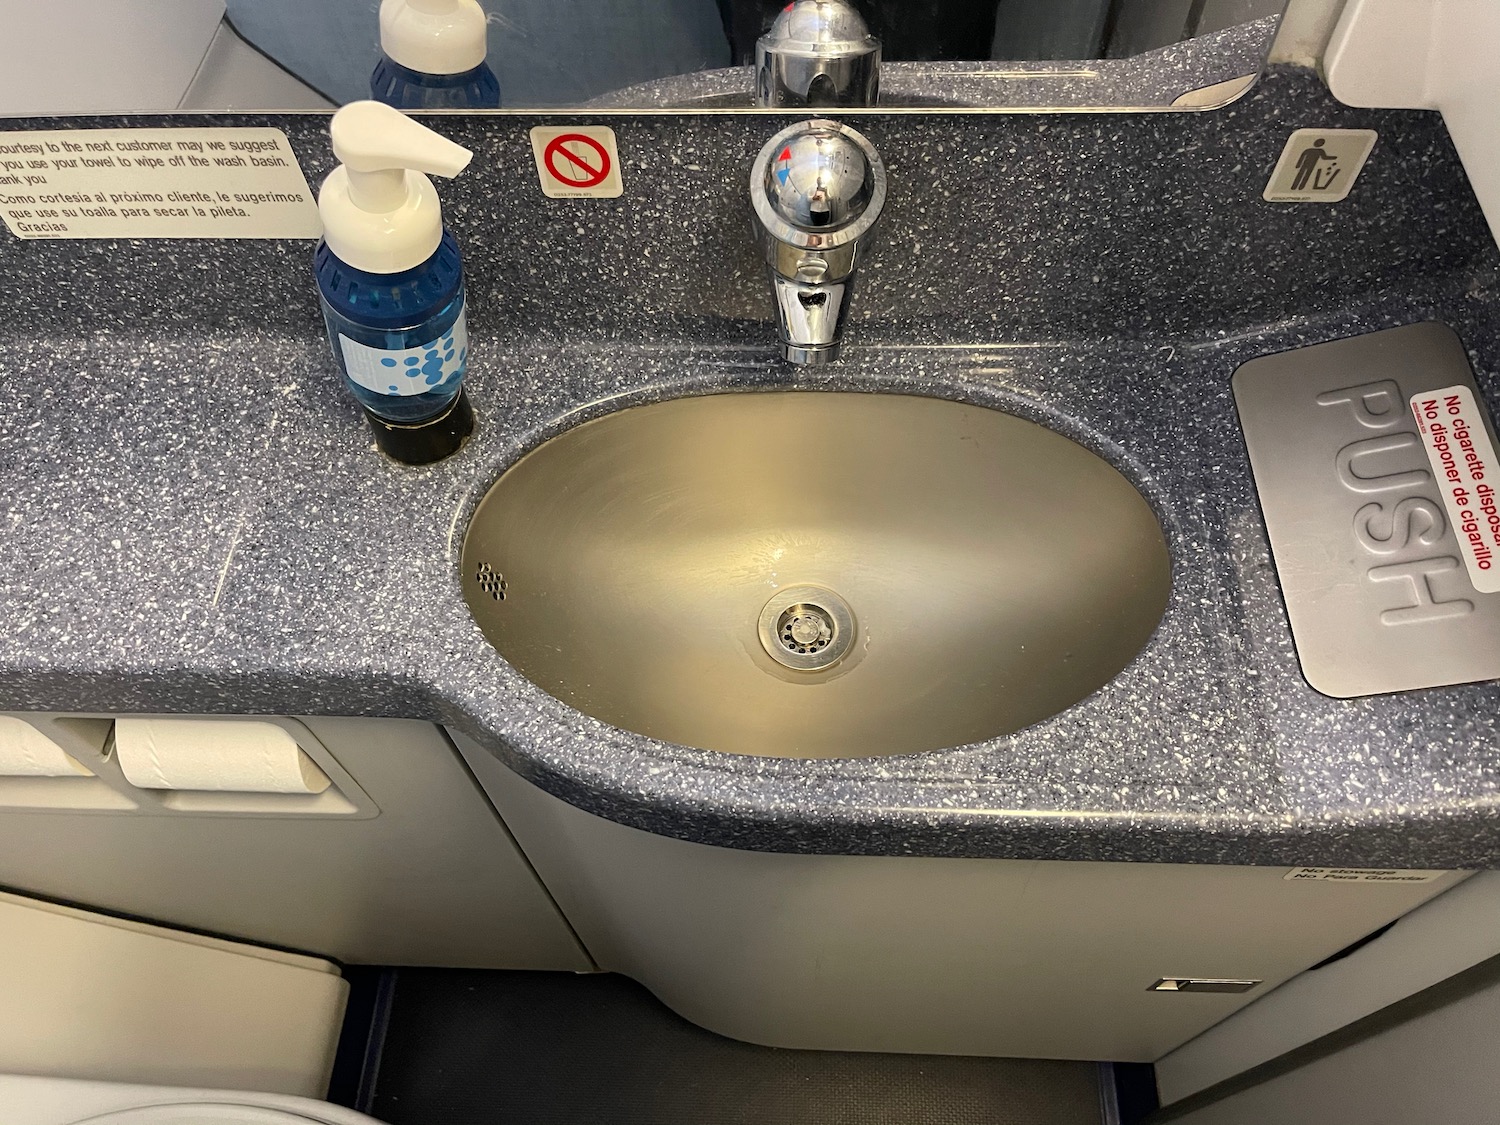 a sink with soap and a bottle of liquid on it